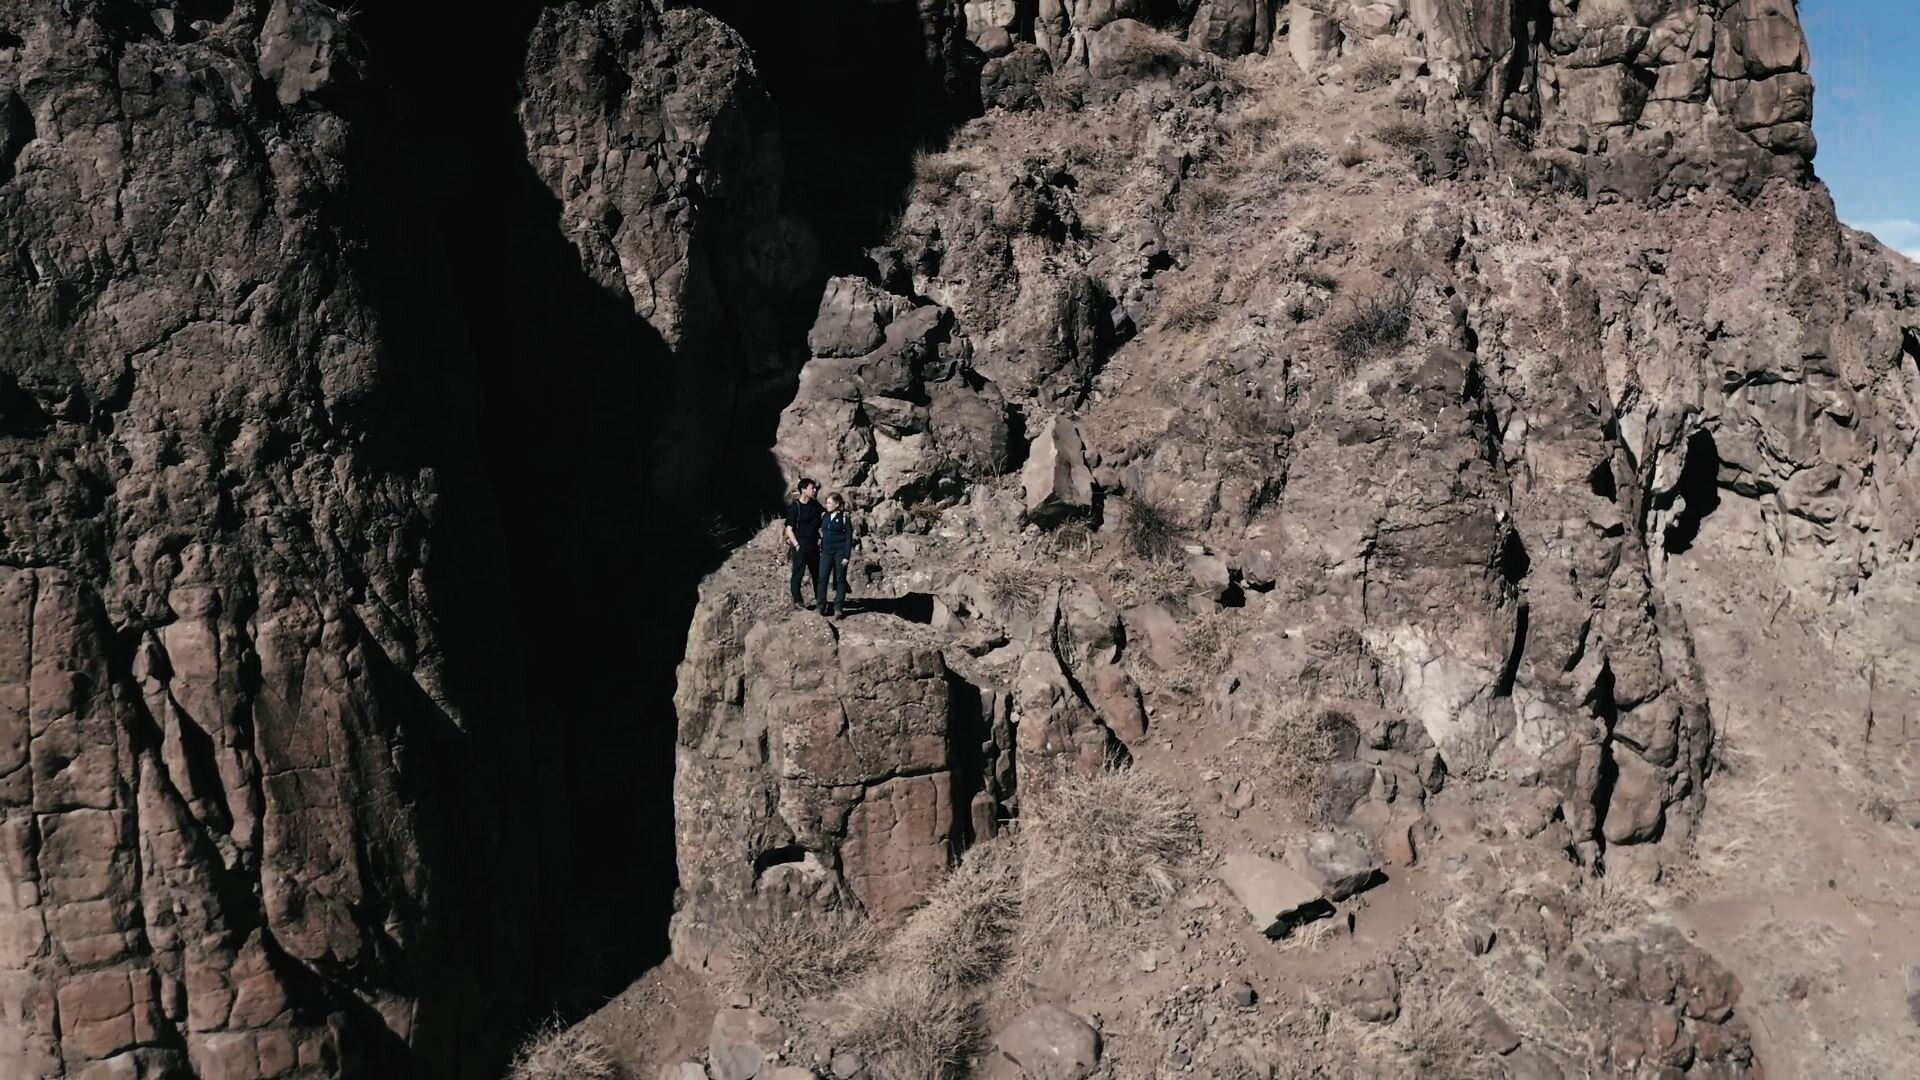  Great drone frame of Heidi and her partner during their hike for the Patient Point video we produced. The footage zooms in closer over time. I think these angles give the video a whole different feel. 